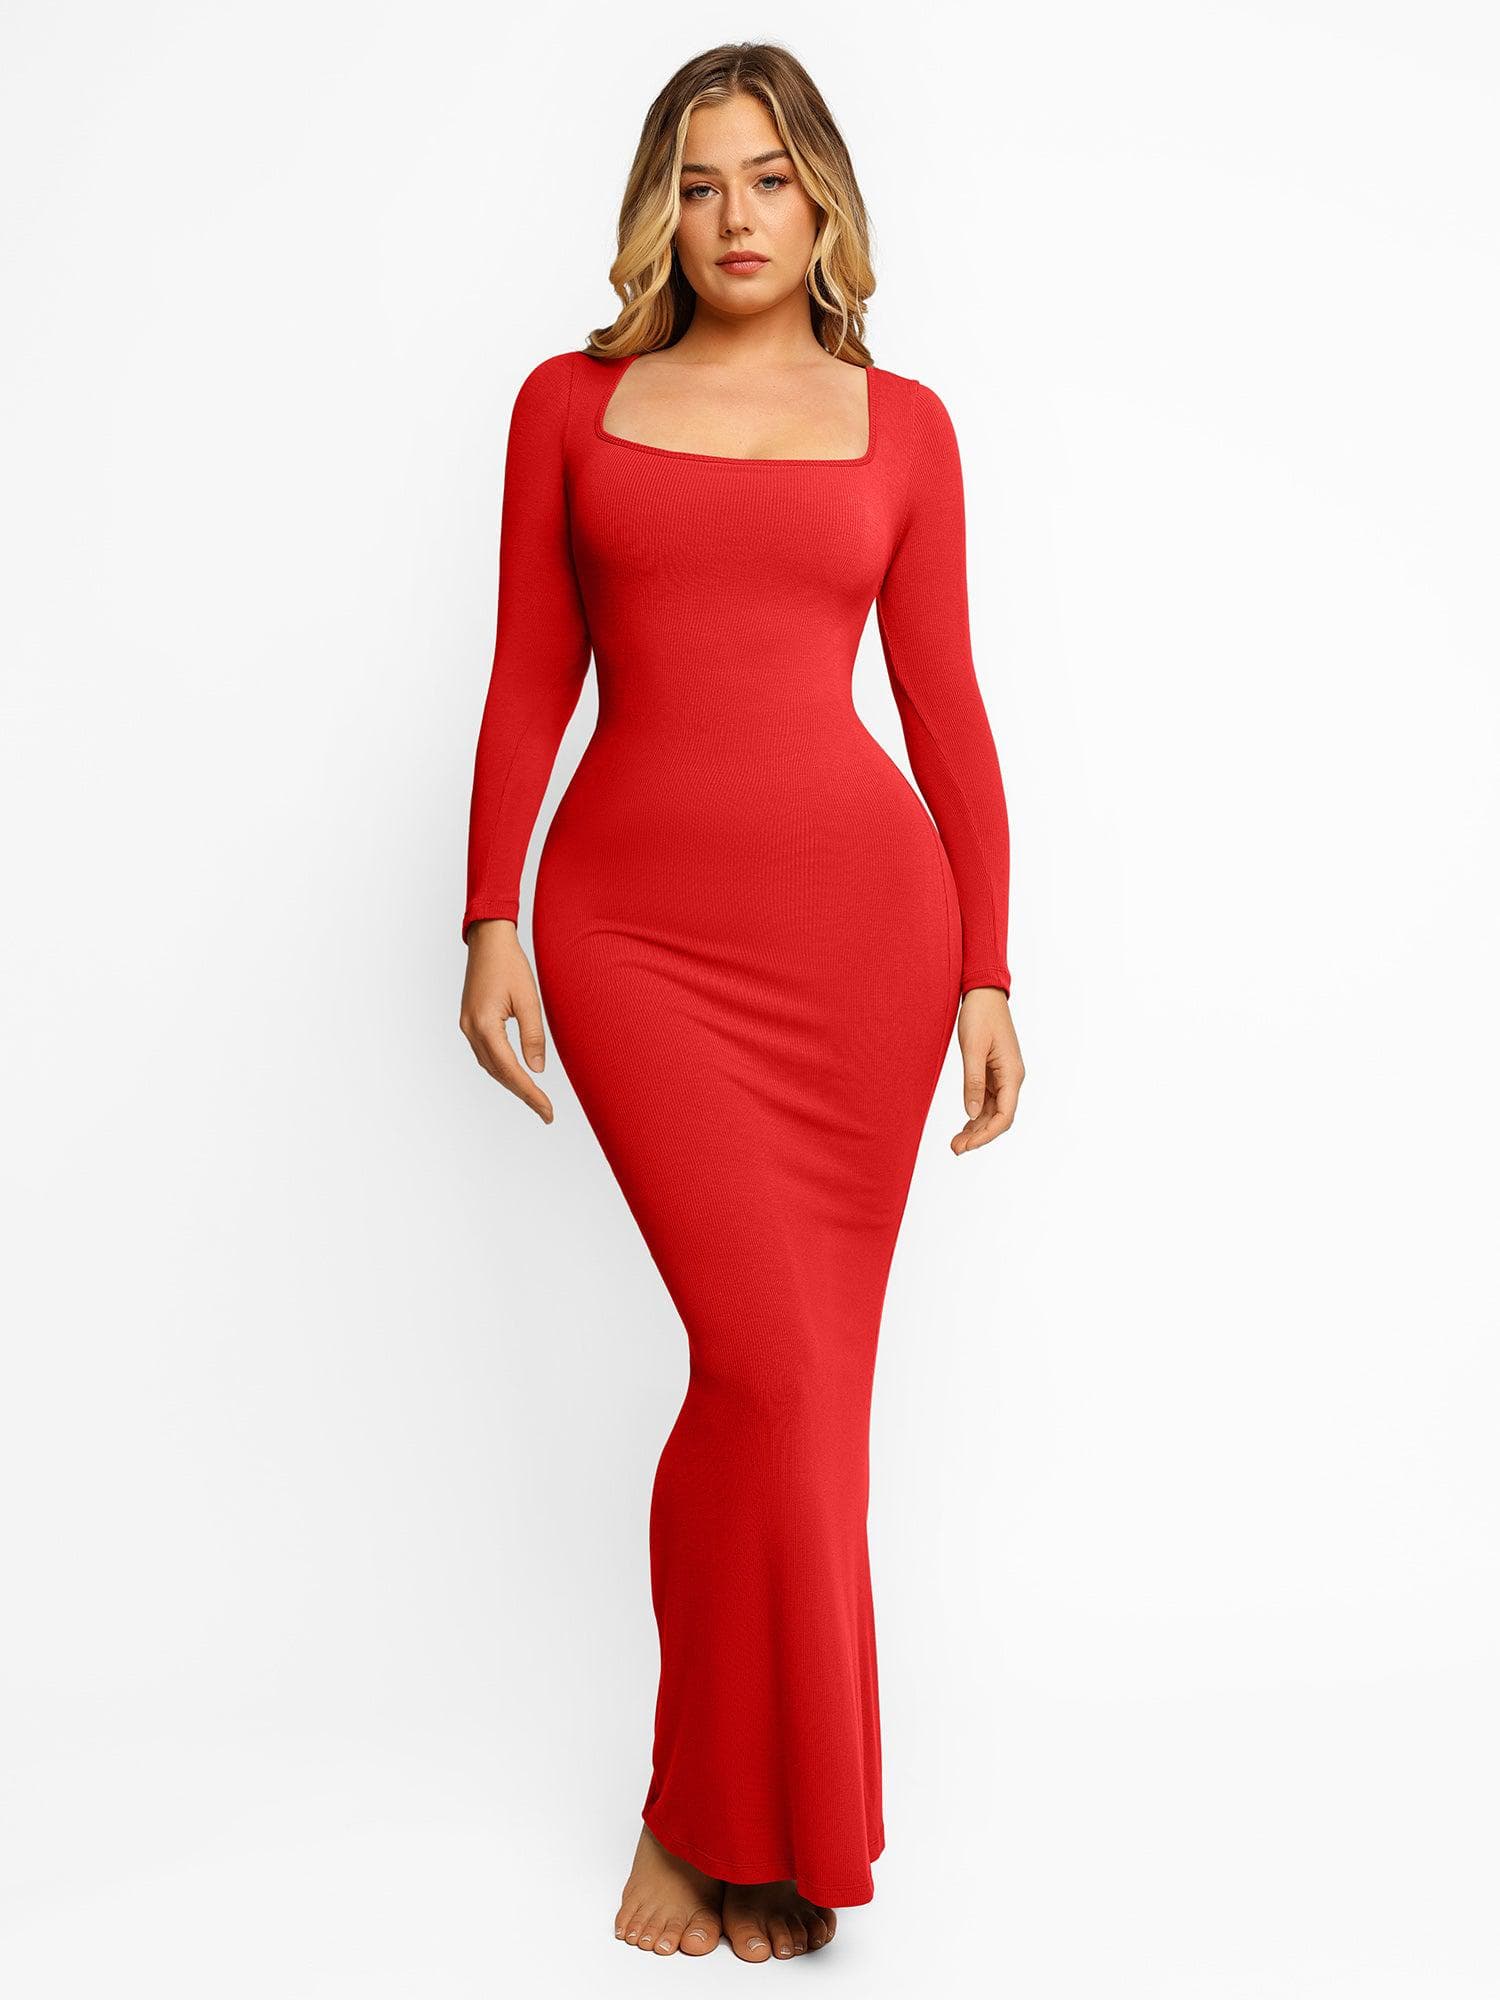 Popilush Has a Variety of Shaper Dresses for You to Select